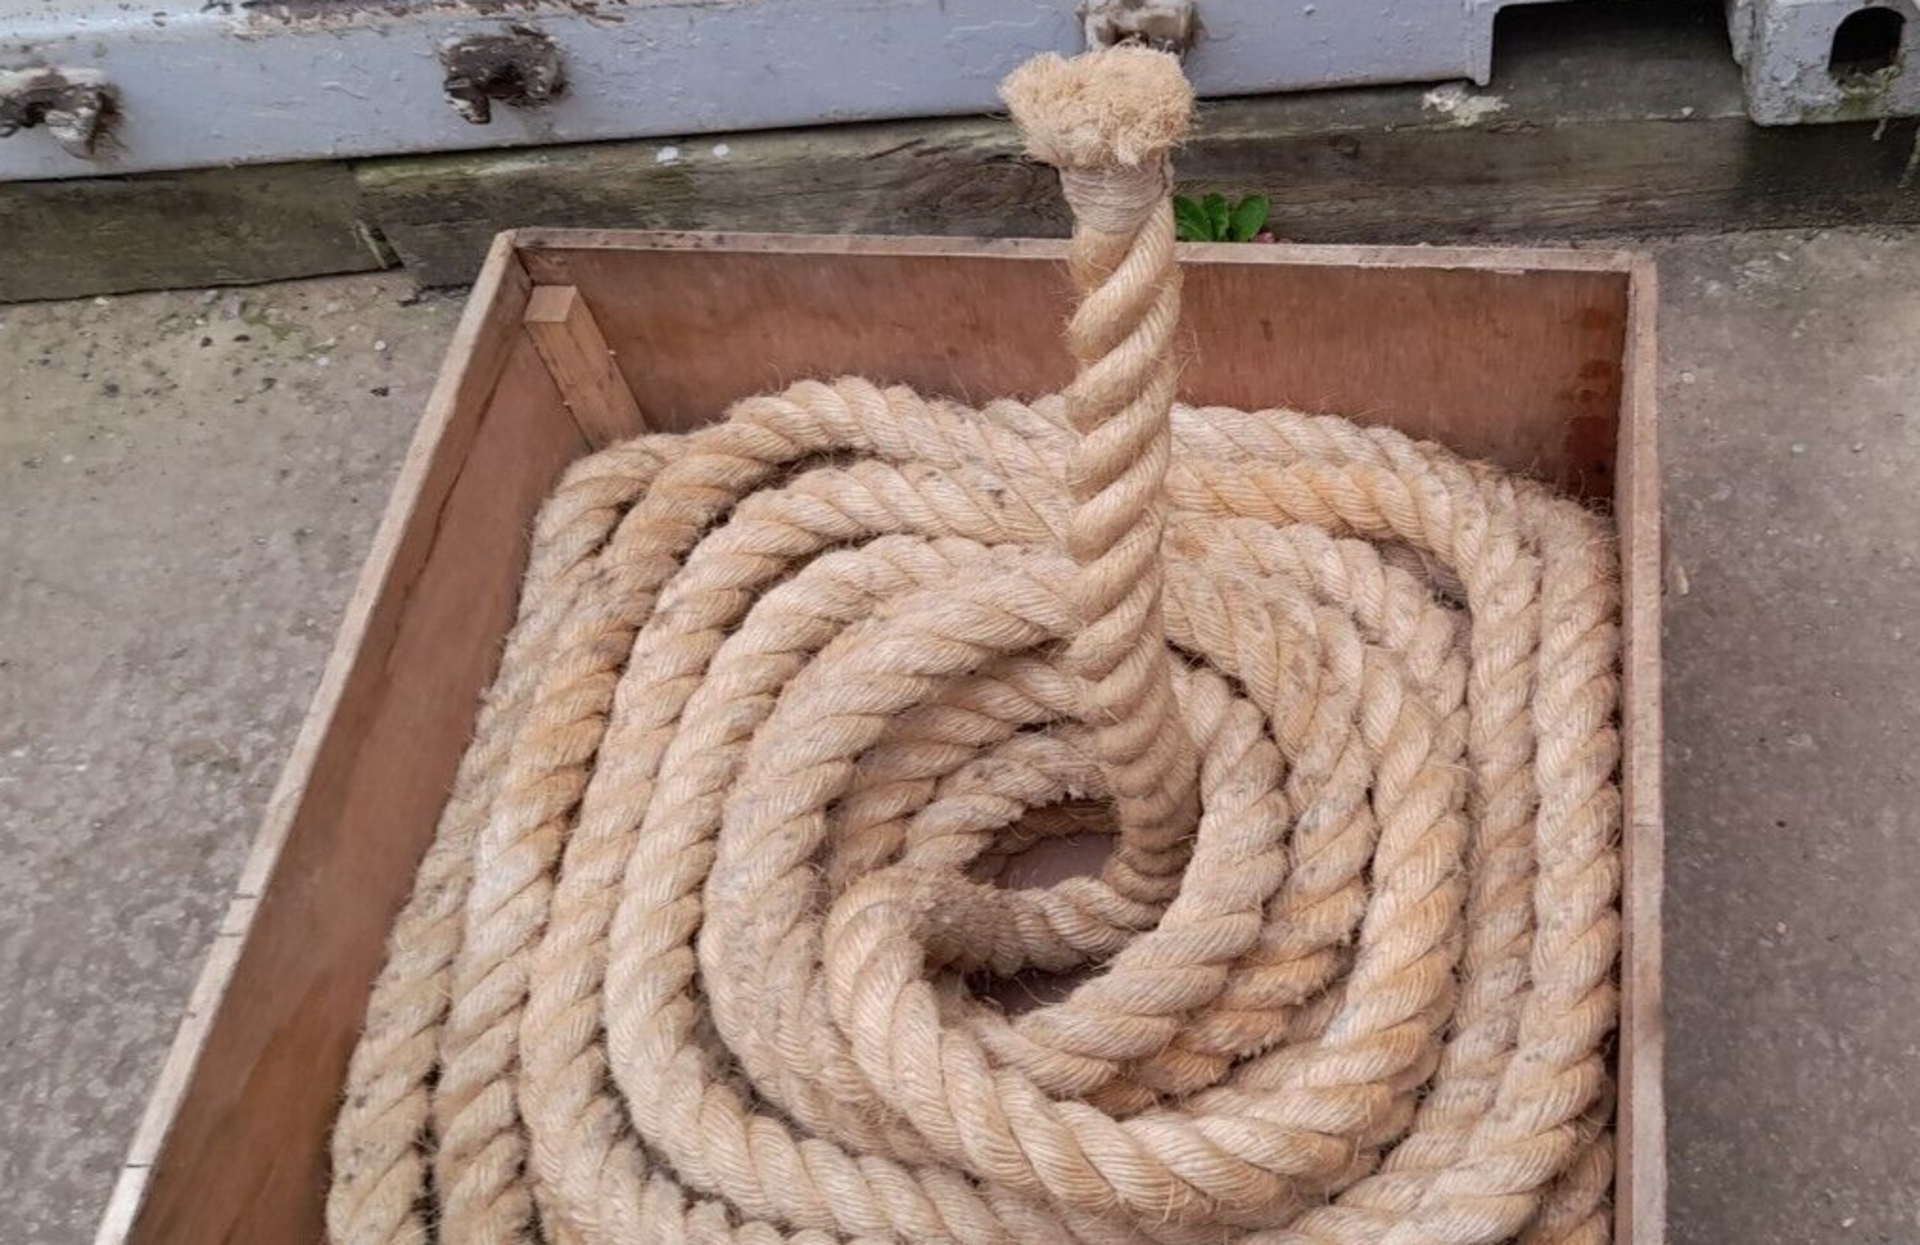 sport TUG O WAR ROPE, USED ONCE, DRY STORED, ABOUT 29 METERS L X 13cm circumference sport gym - Bild 3 aus 5